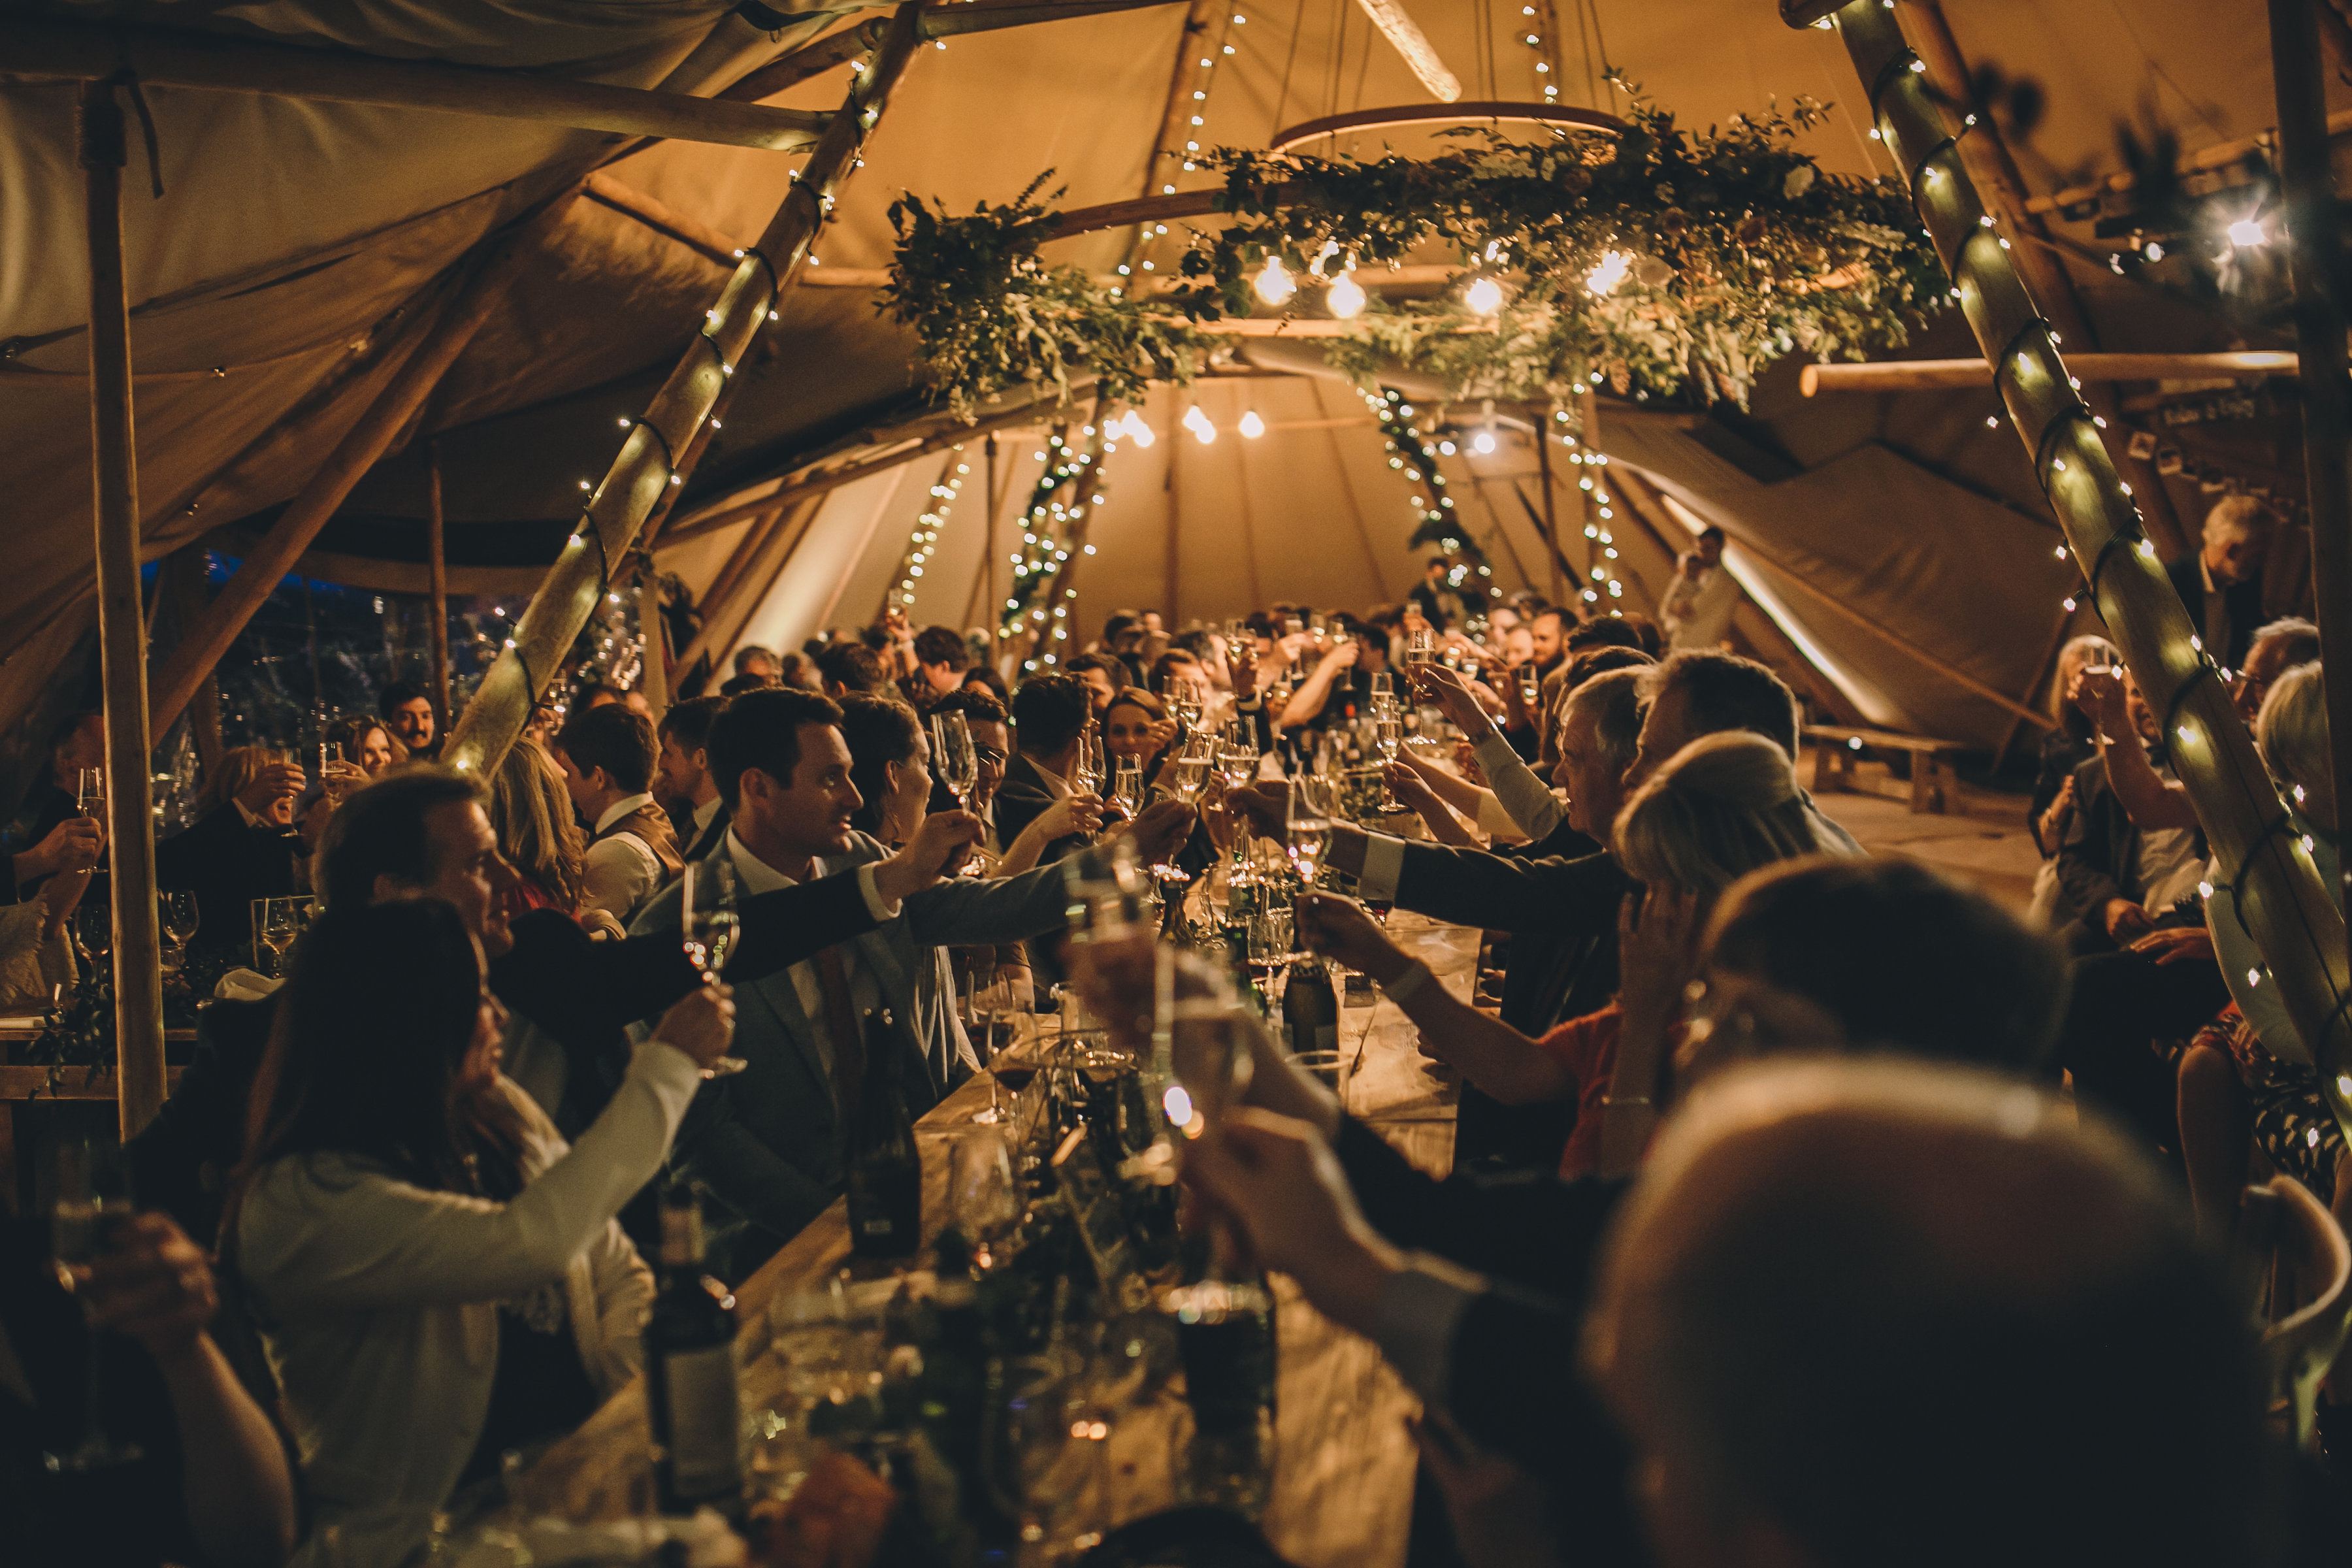 Wedding tipi with tressle tables